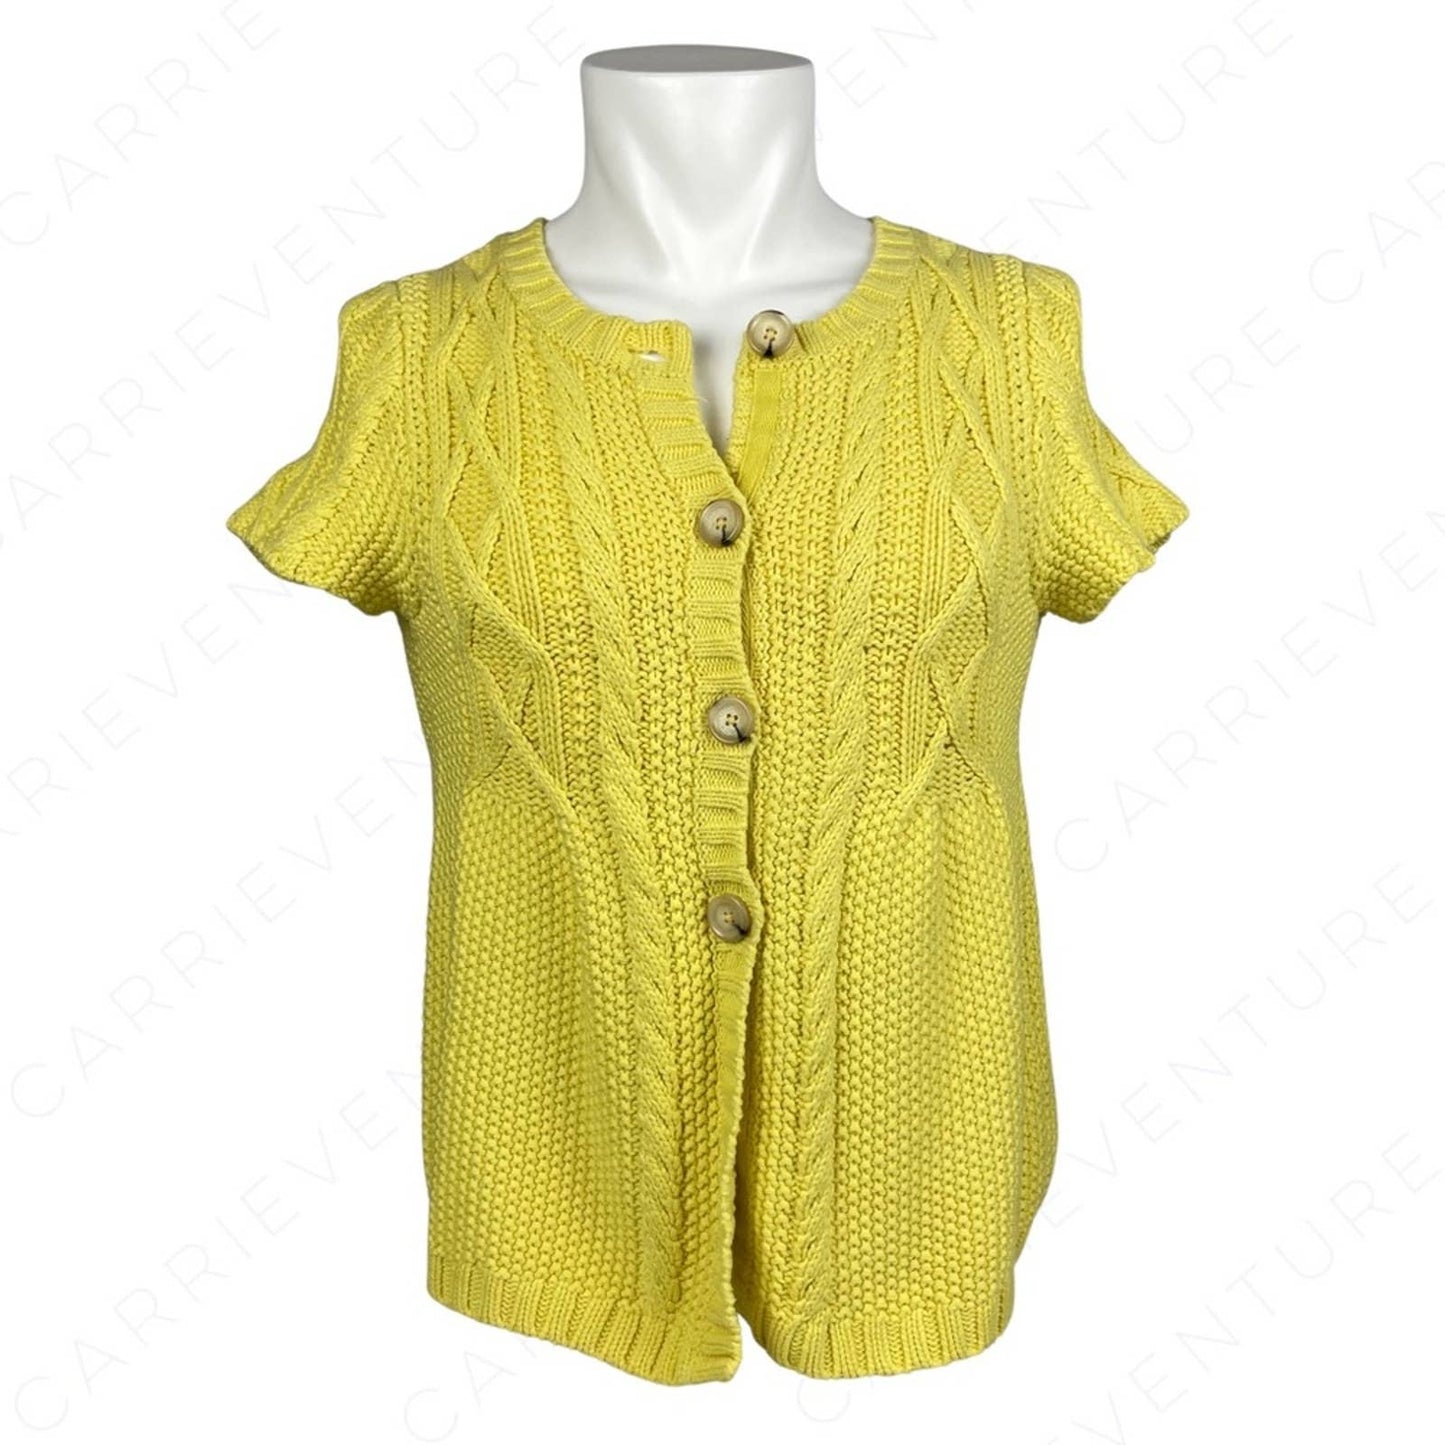 MICHAEL Michael Kors Yellow Short Sleeve Button Front Spring Cardigan Sweater Size S